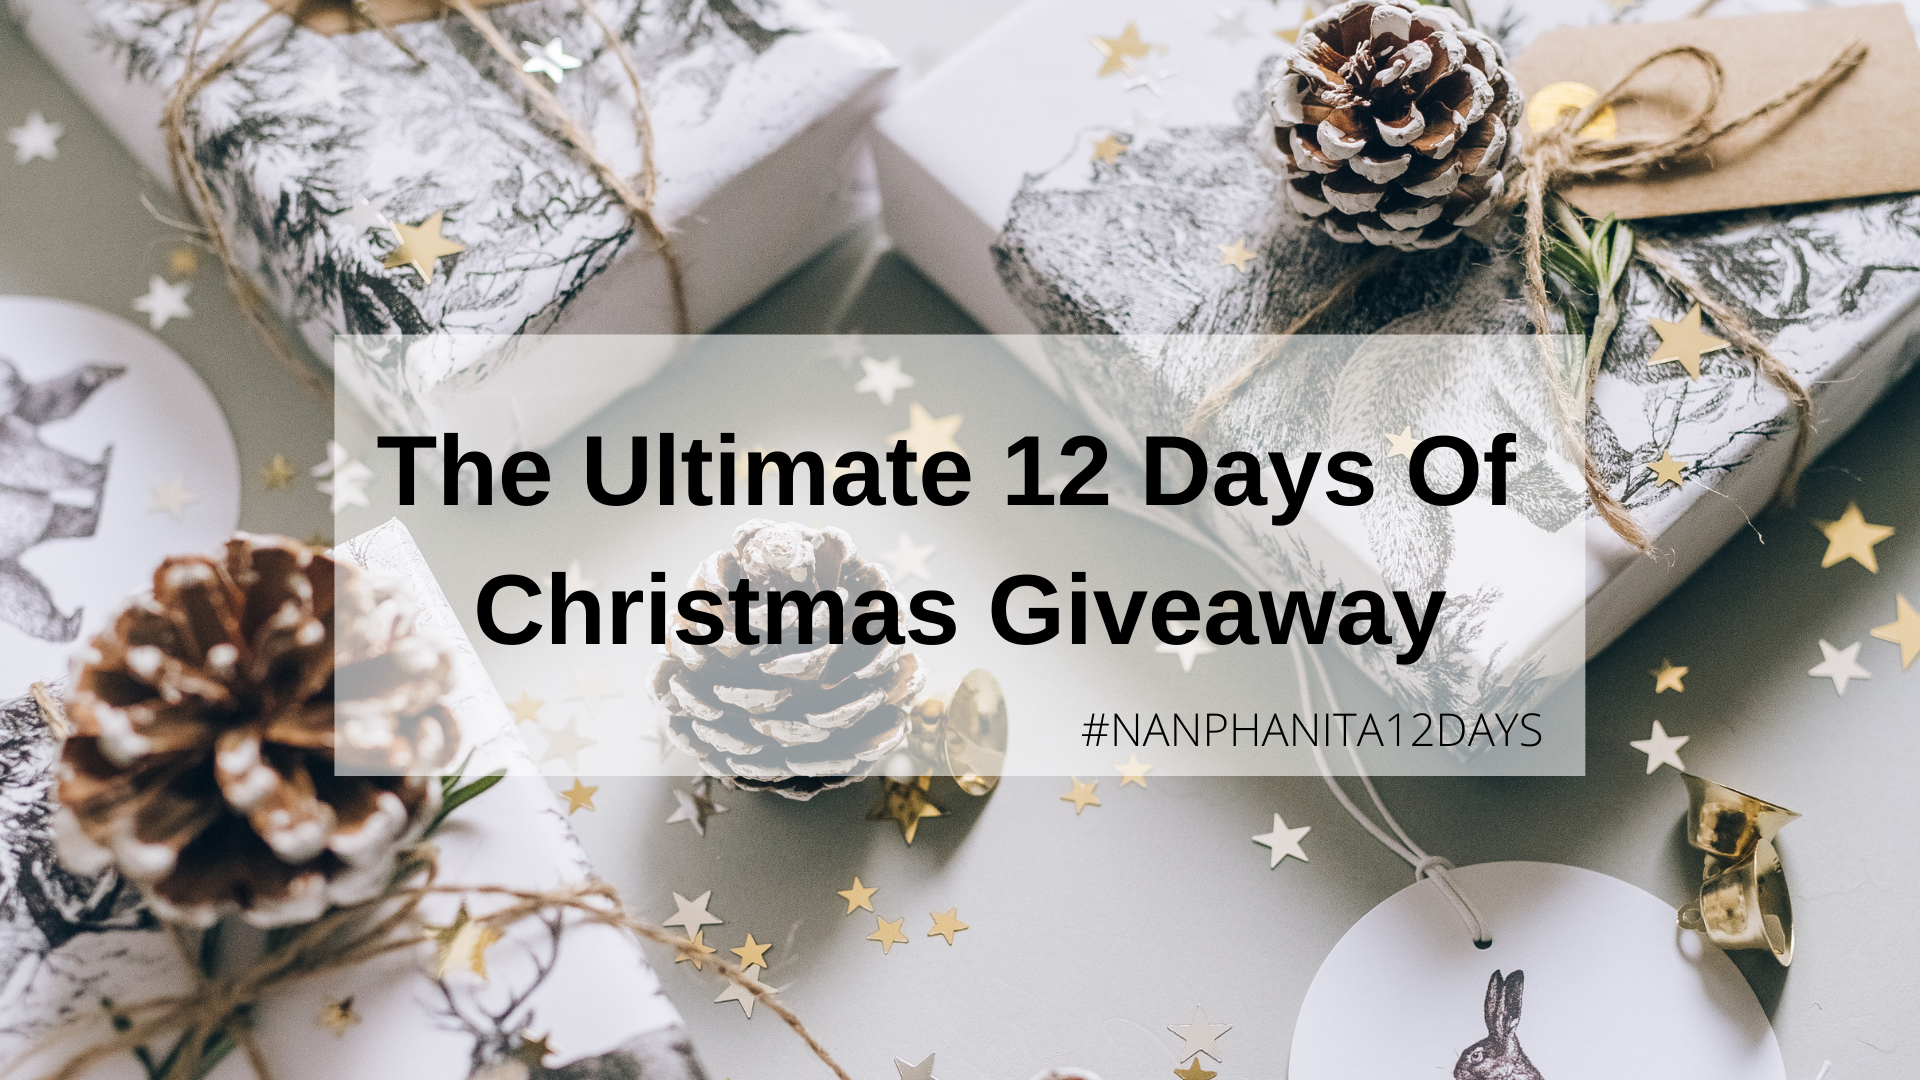 How Many Gifts Did I Get Over the Twelve Days of Christmas? - Owlcation